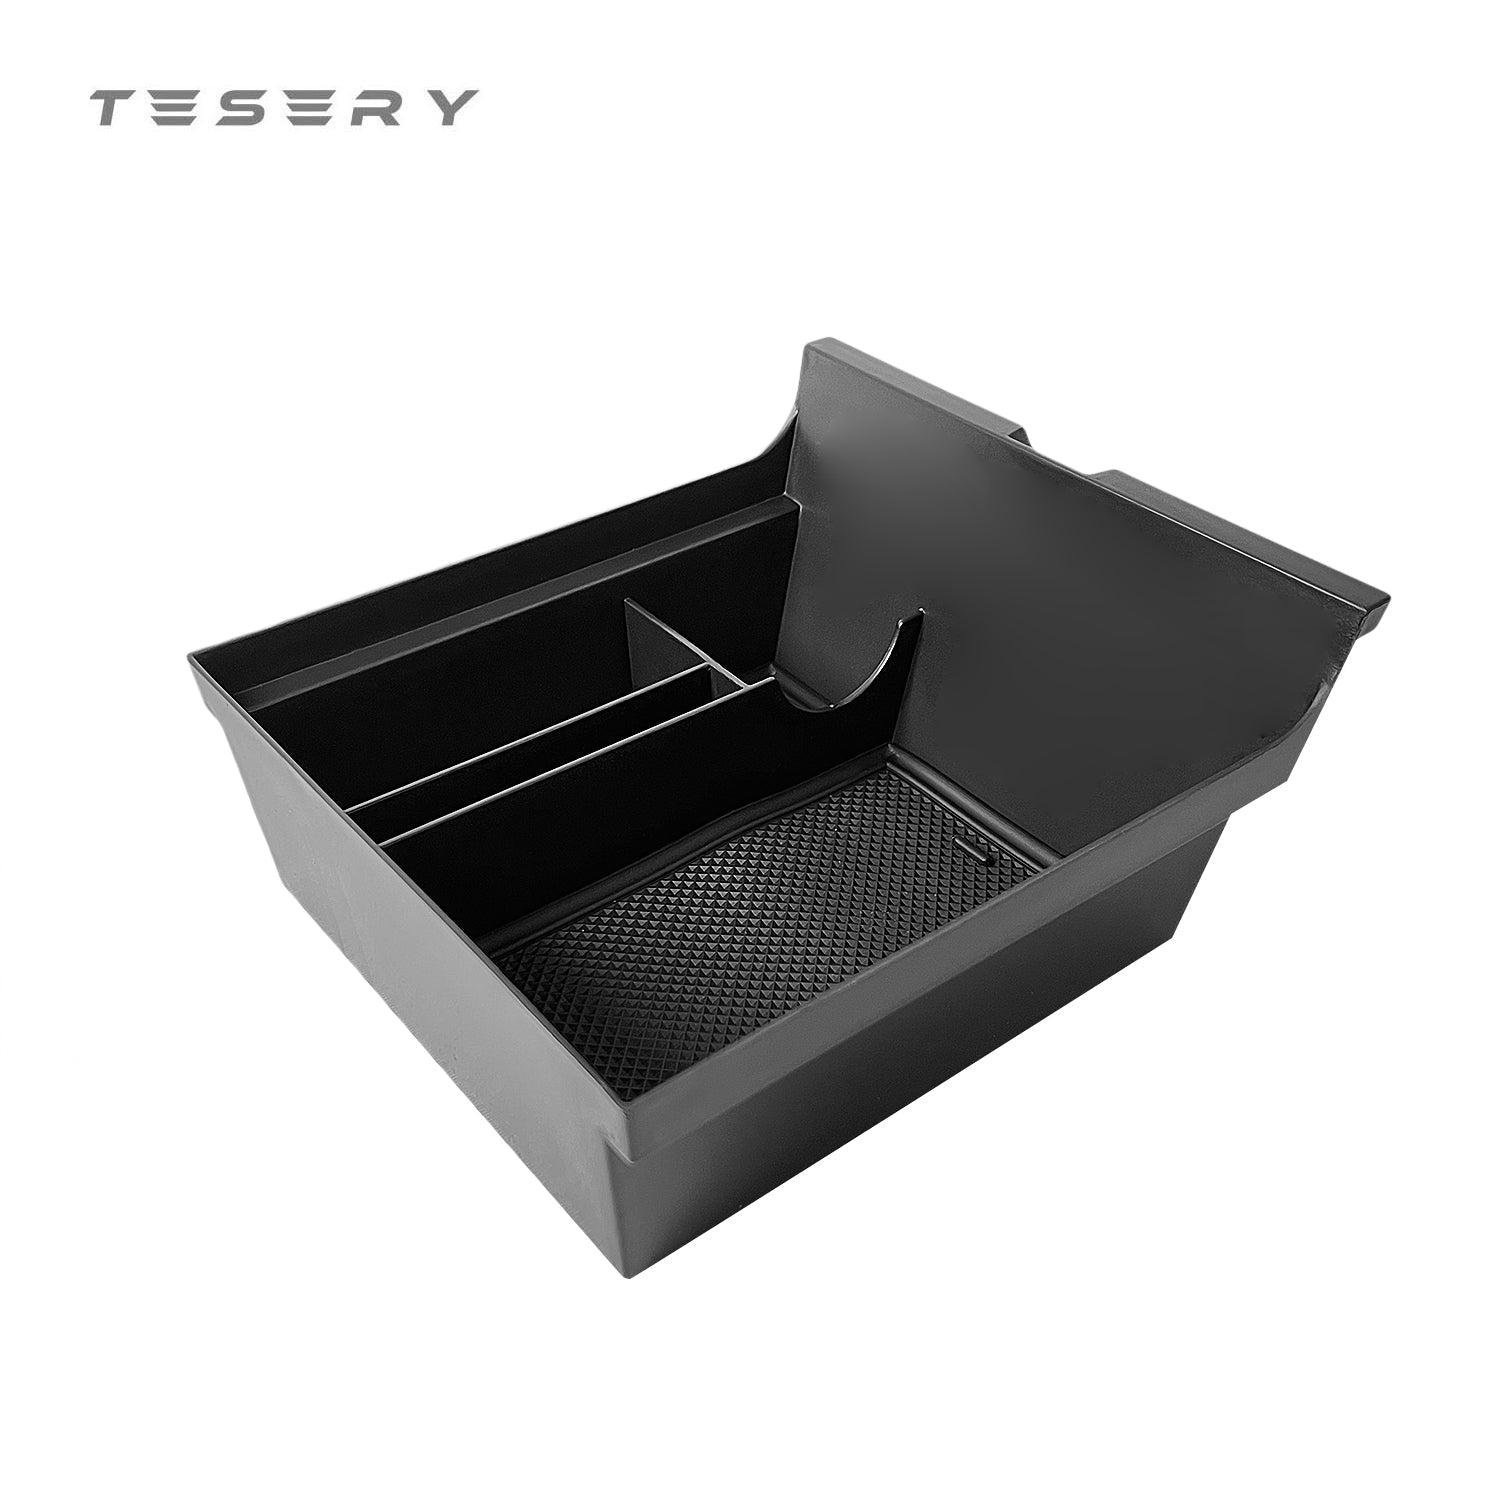 2023 Tesla Model 3 Model Y Accessories Center Console Organizer Tray  Armrest Hidden Cubby Drawer Storage Box ABS Material for Tidy Collection of